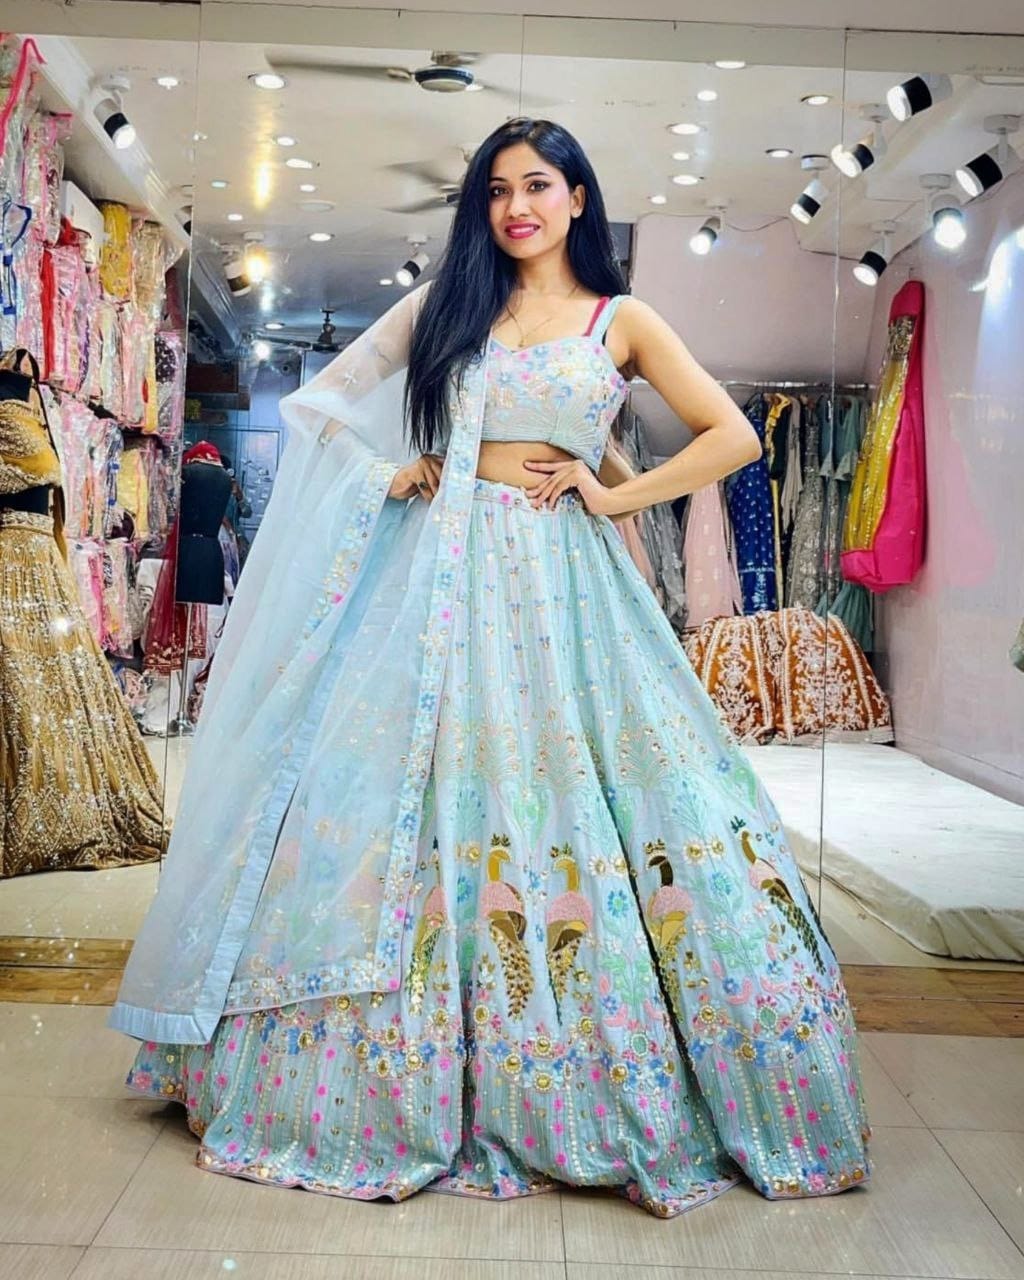 20 White Designer Bridal Lehengas That You Will Fall In Love With - Eternity